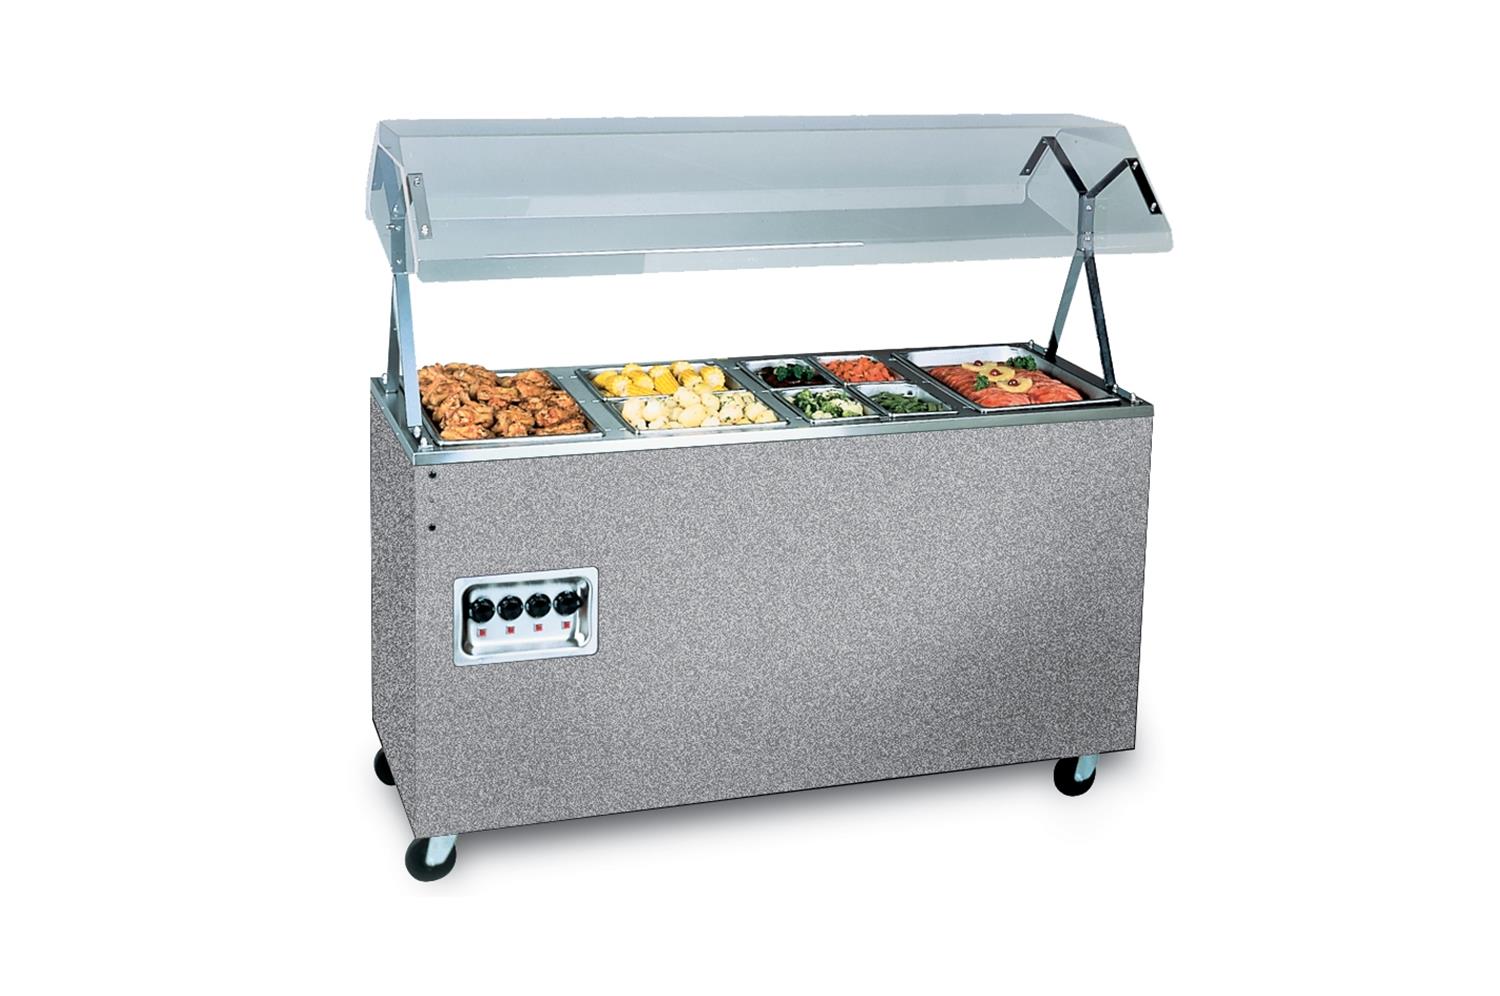 Vollrath 38728A Affordable Portable Hot Food Station, 3 Well